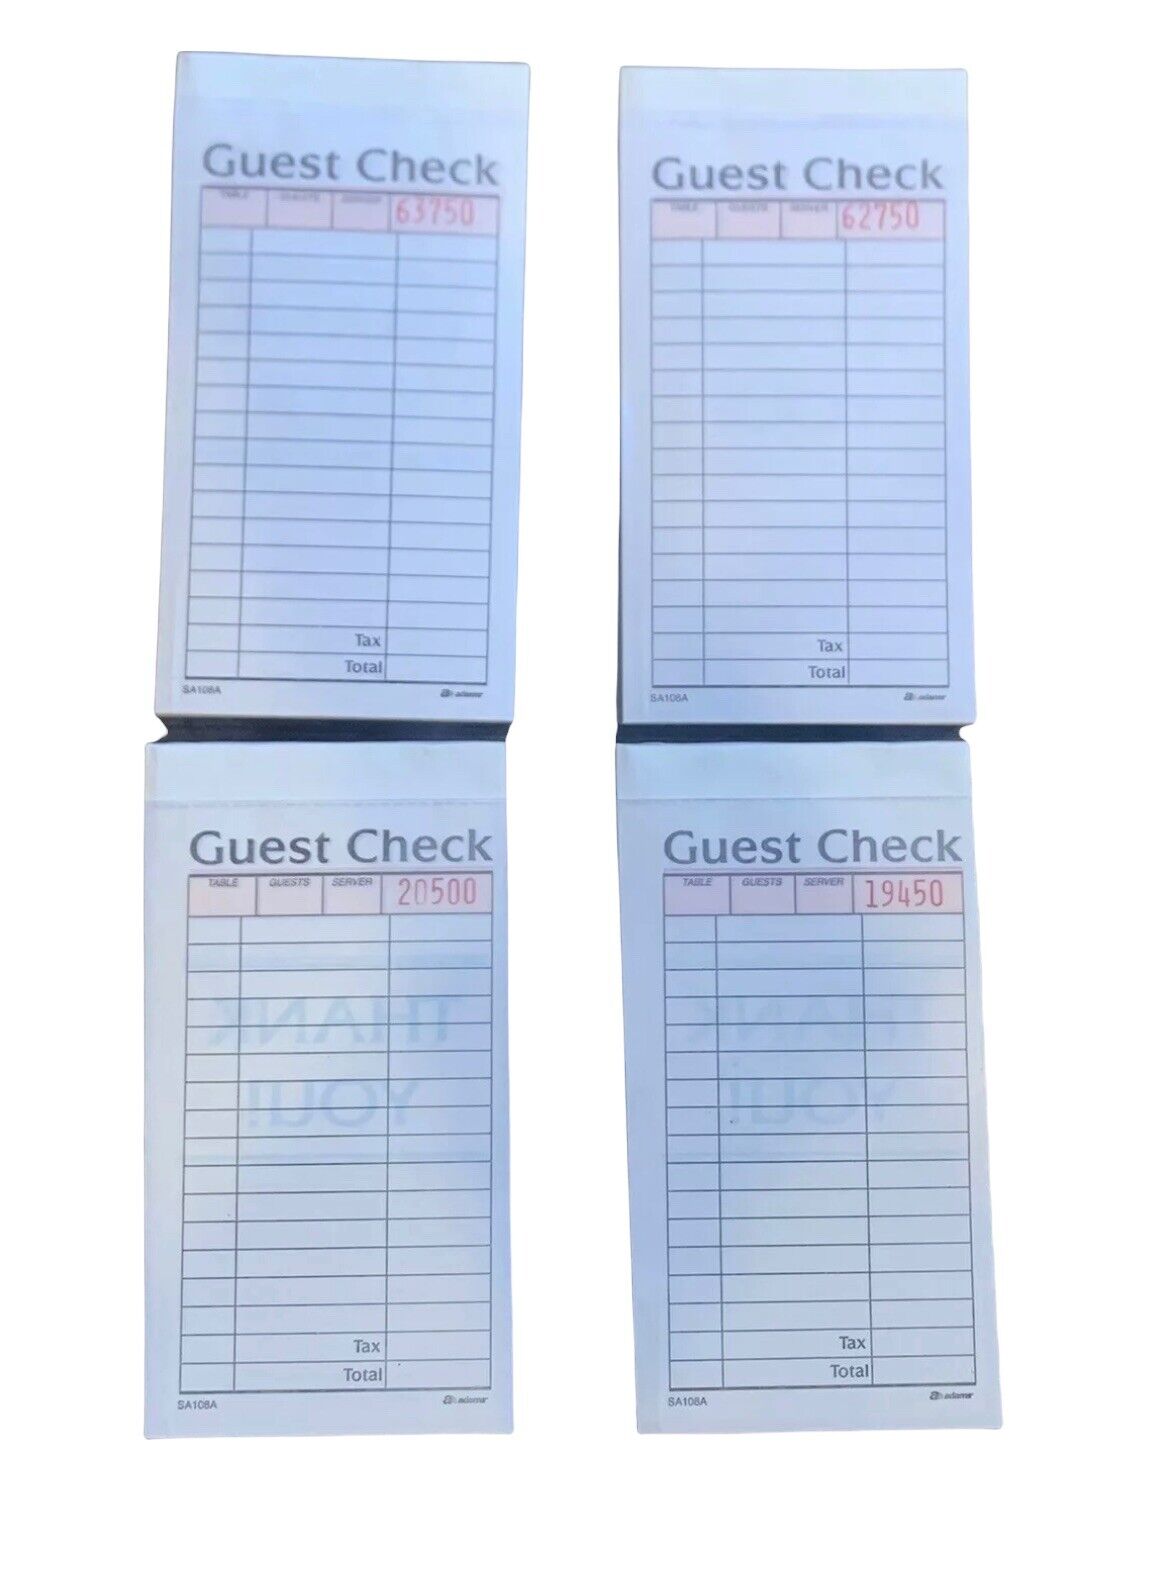 Restaurant Guest Check 4 Books 2-Part Carbonless - 4 Books of 50  (200 total)